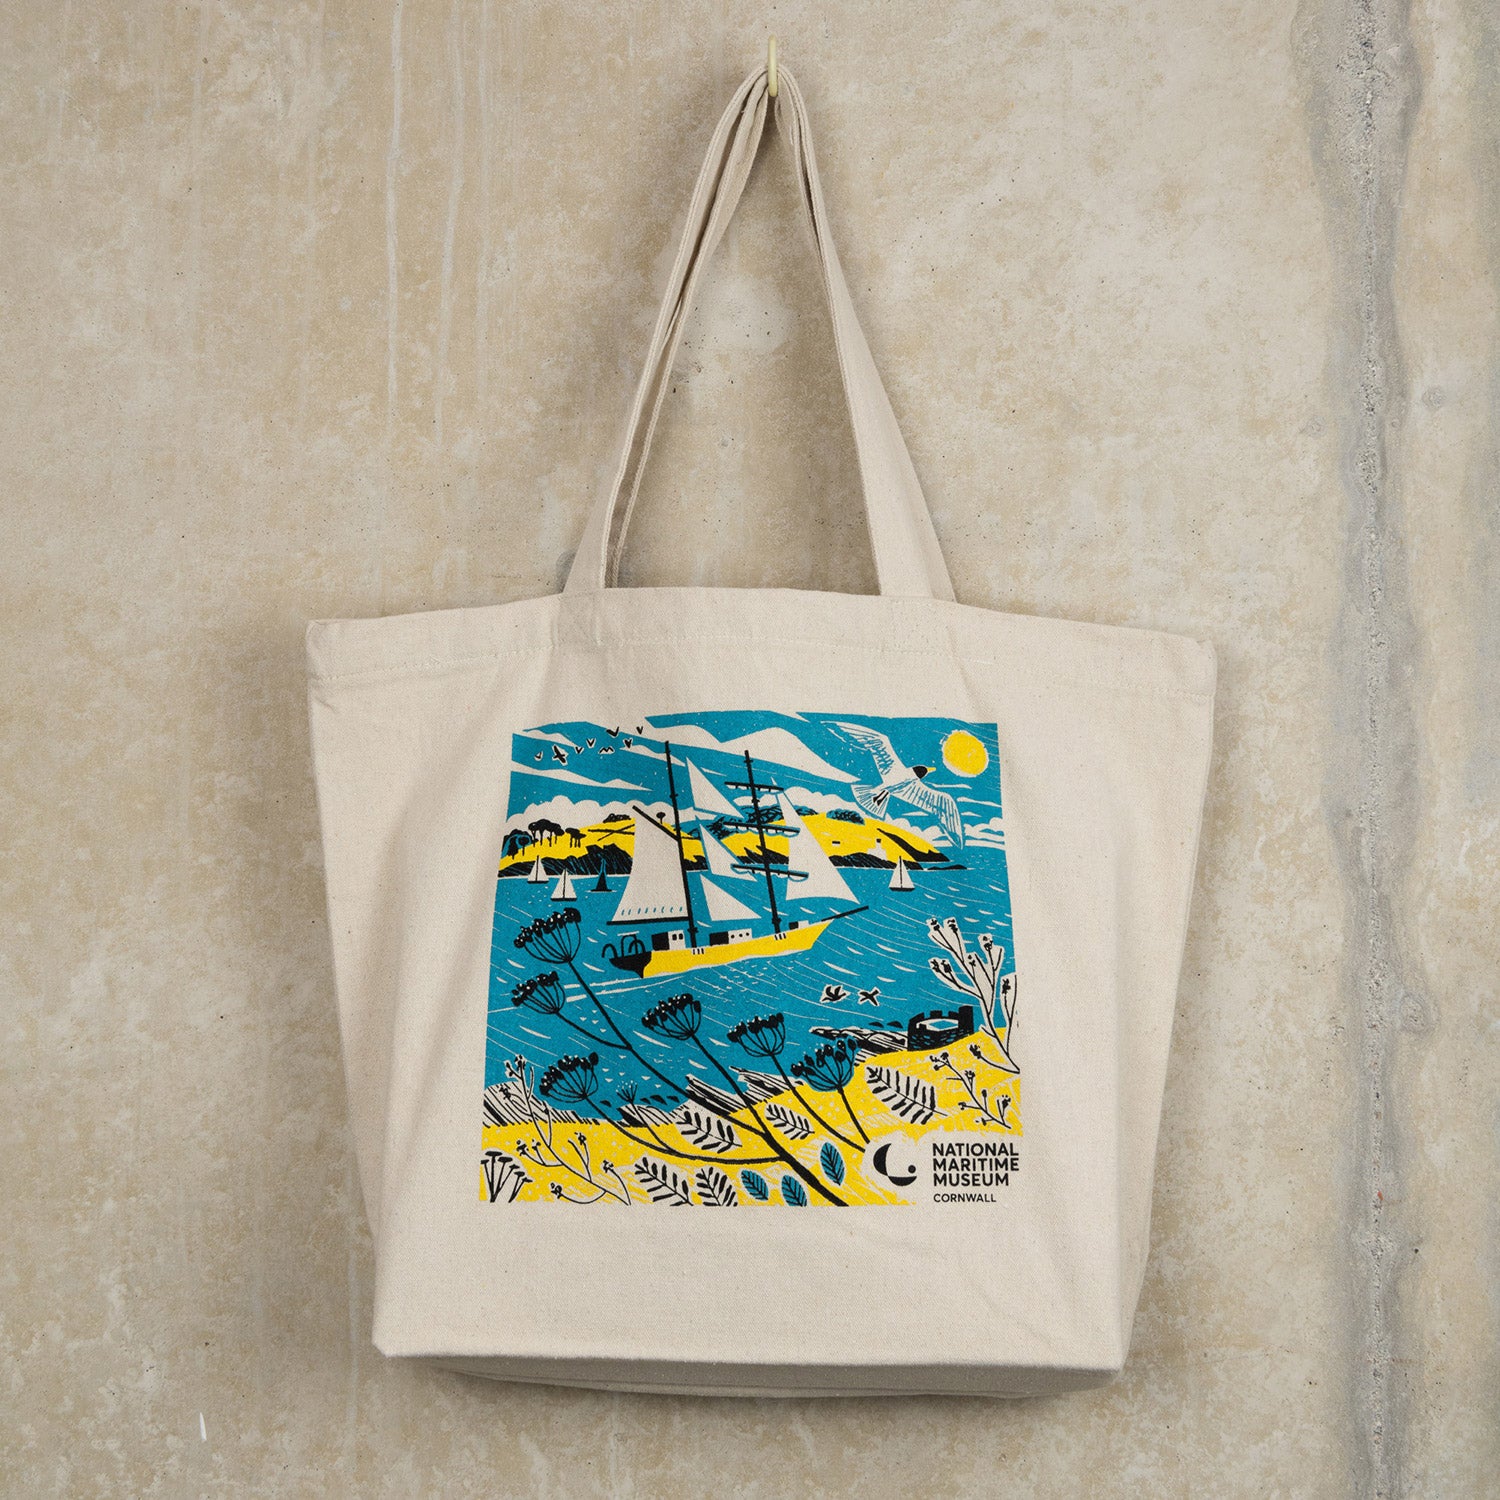 The Falmouth Tall Ship Tote Bag featuring a blue, yellow and white design of a tall ship in full sail. The tote bag is hanging from a hook against a light grey background.